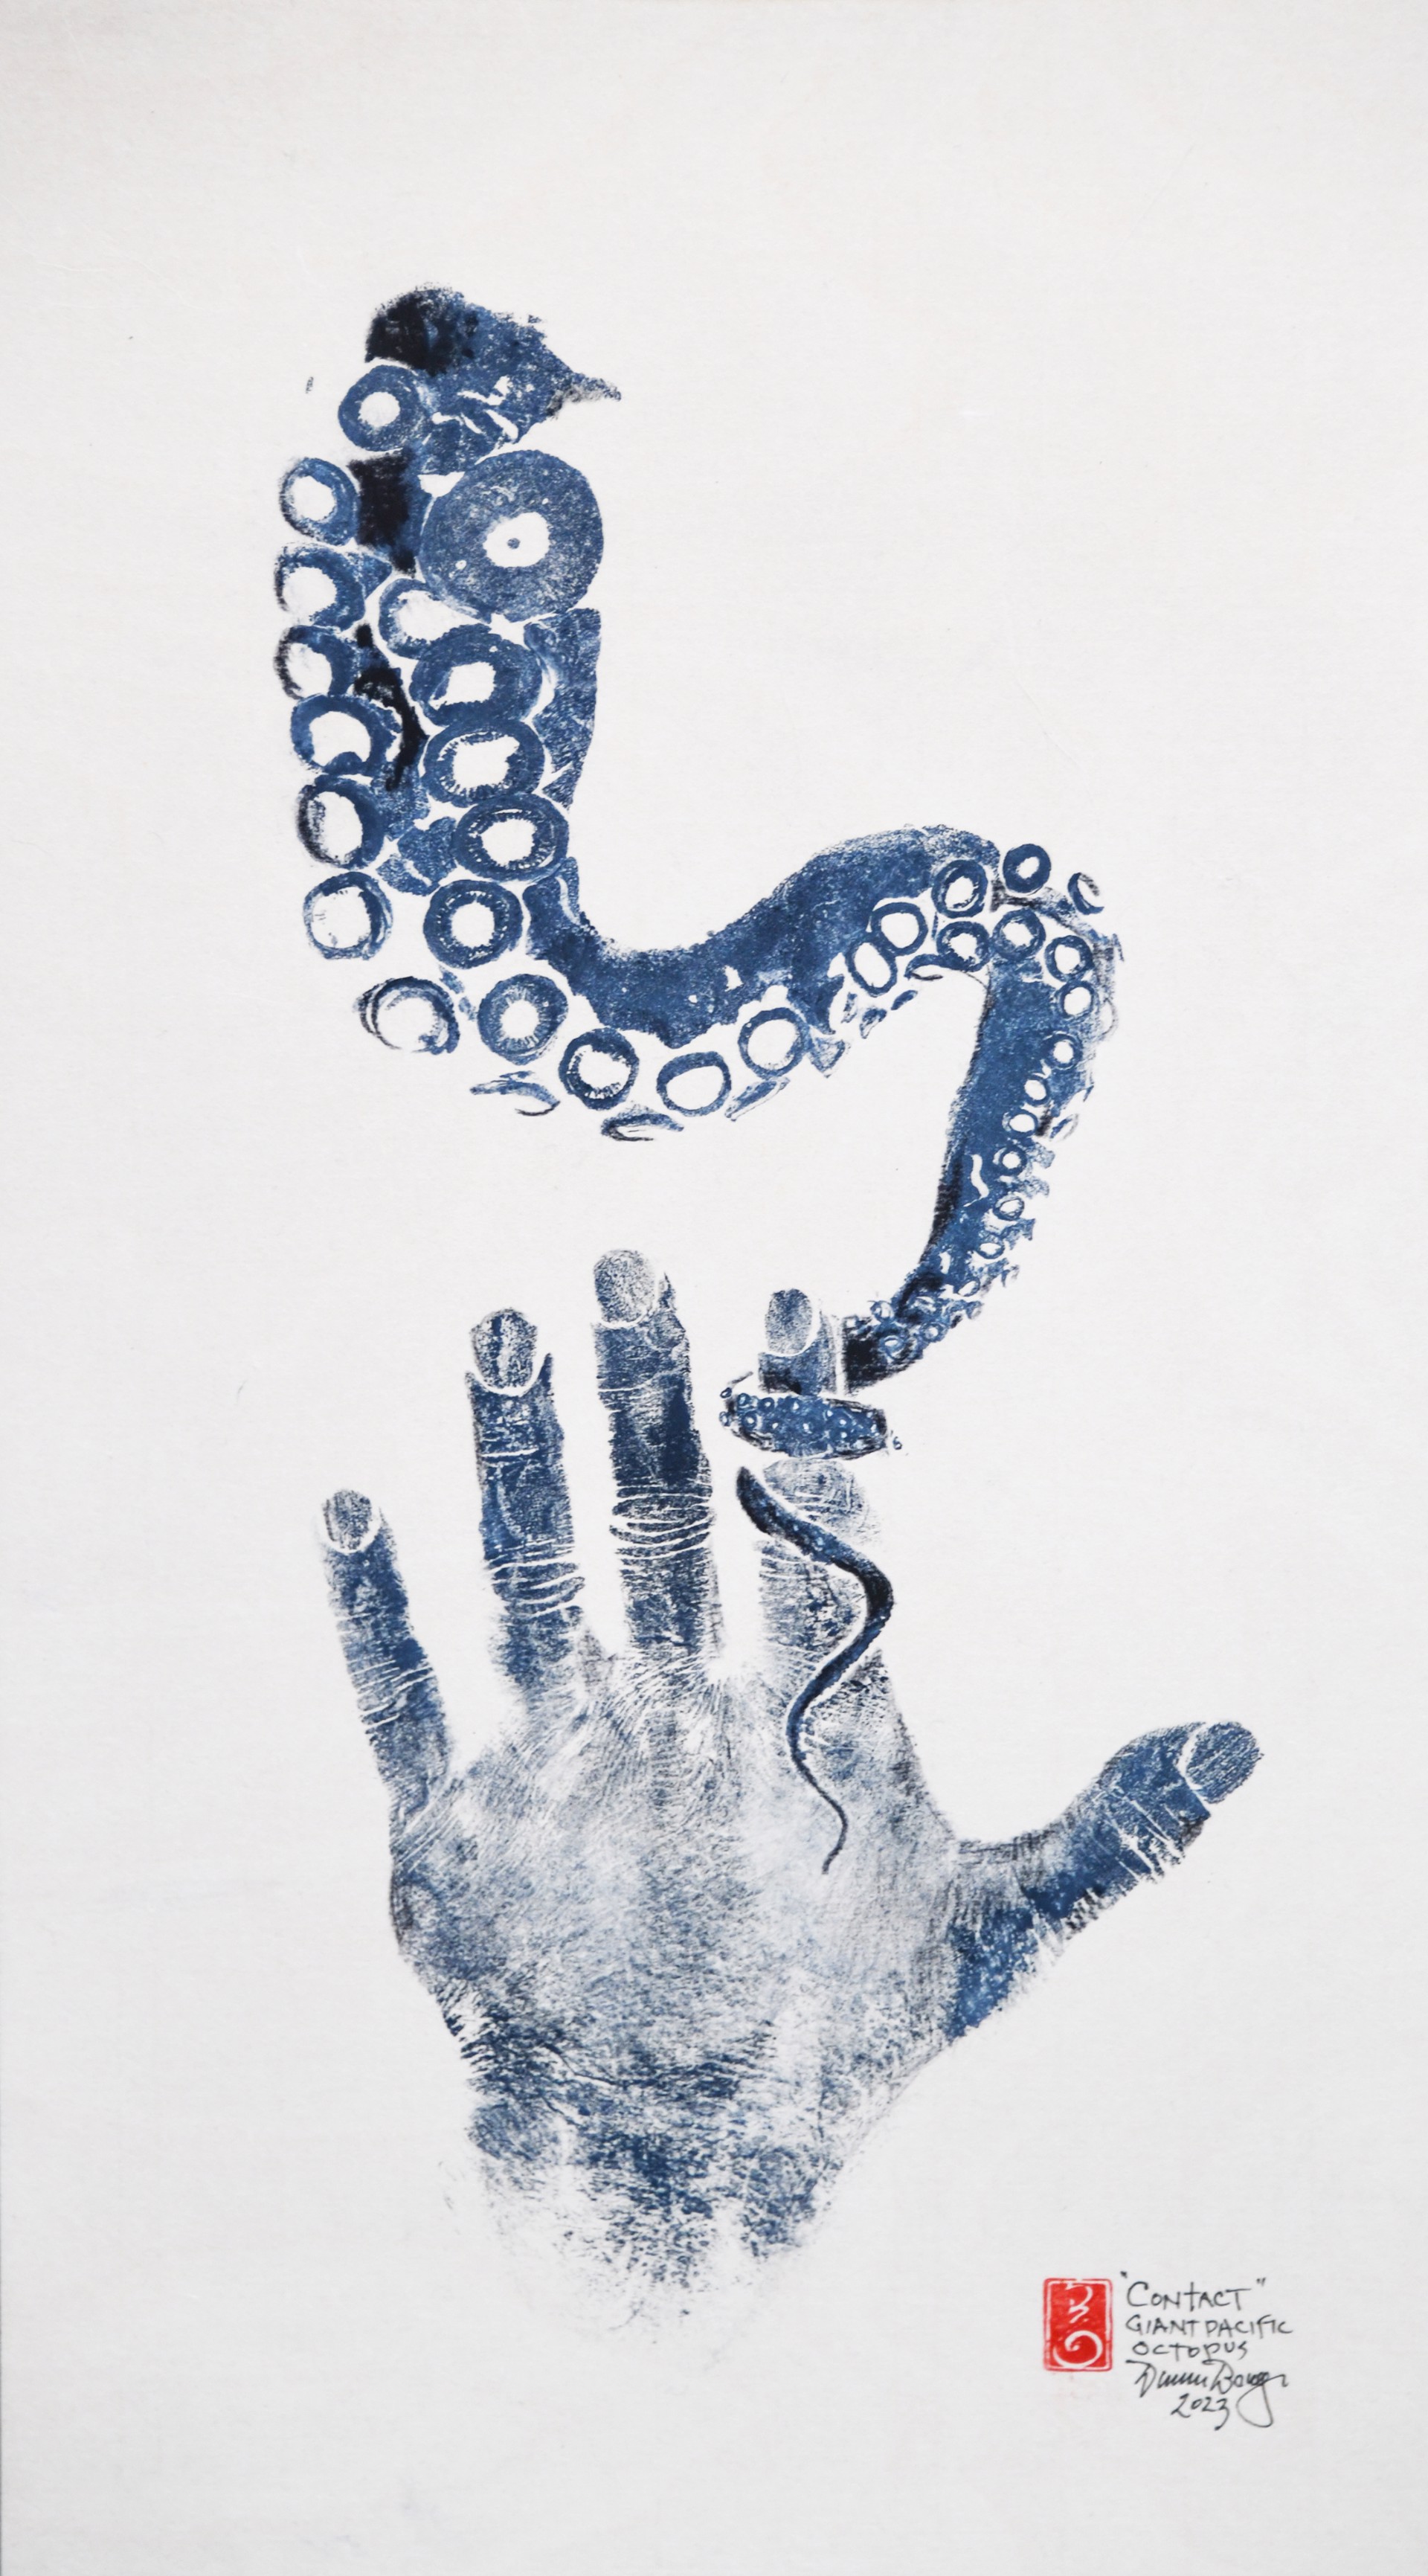 Connection: Baby Octopus and Hand by Duncan Berry